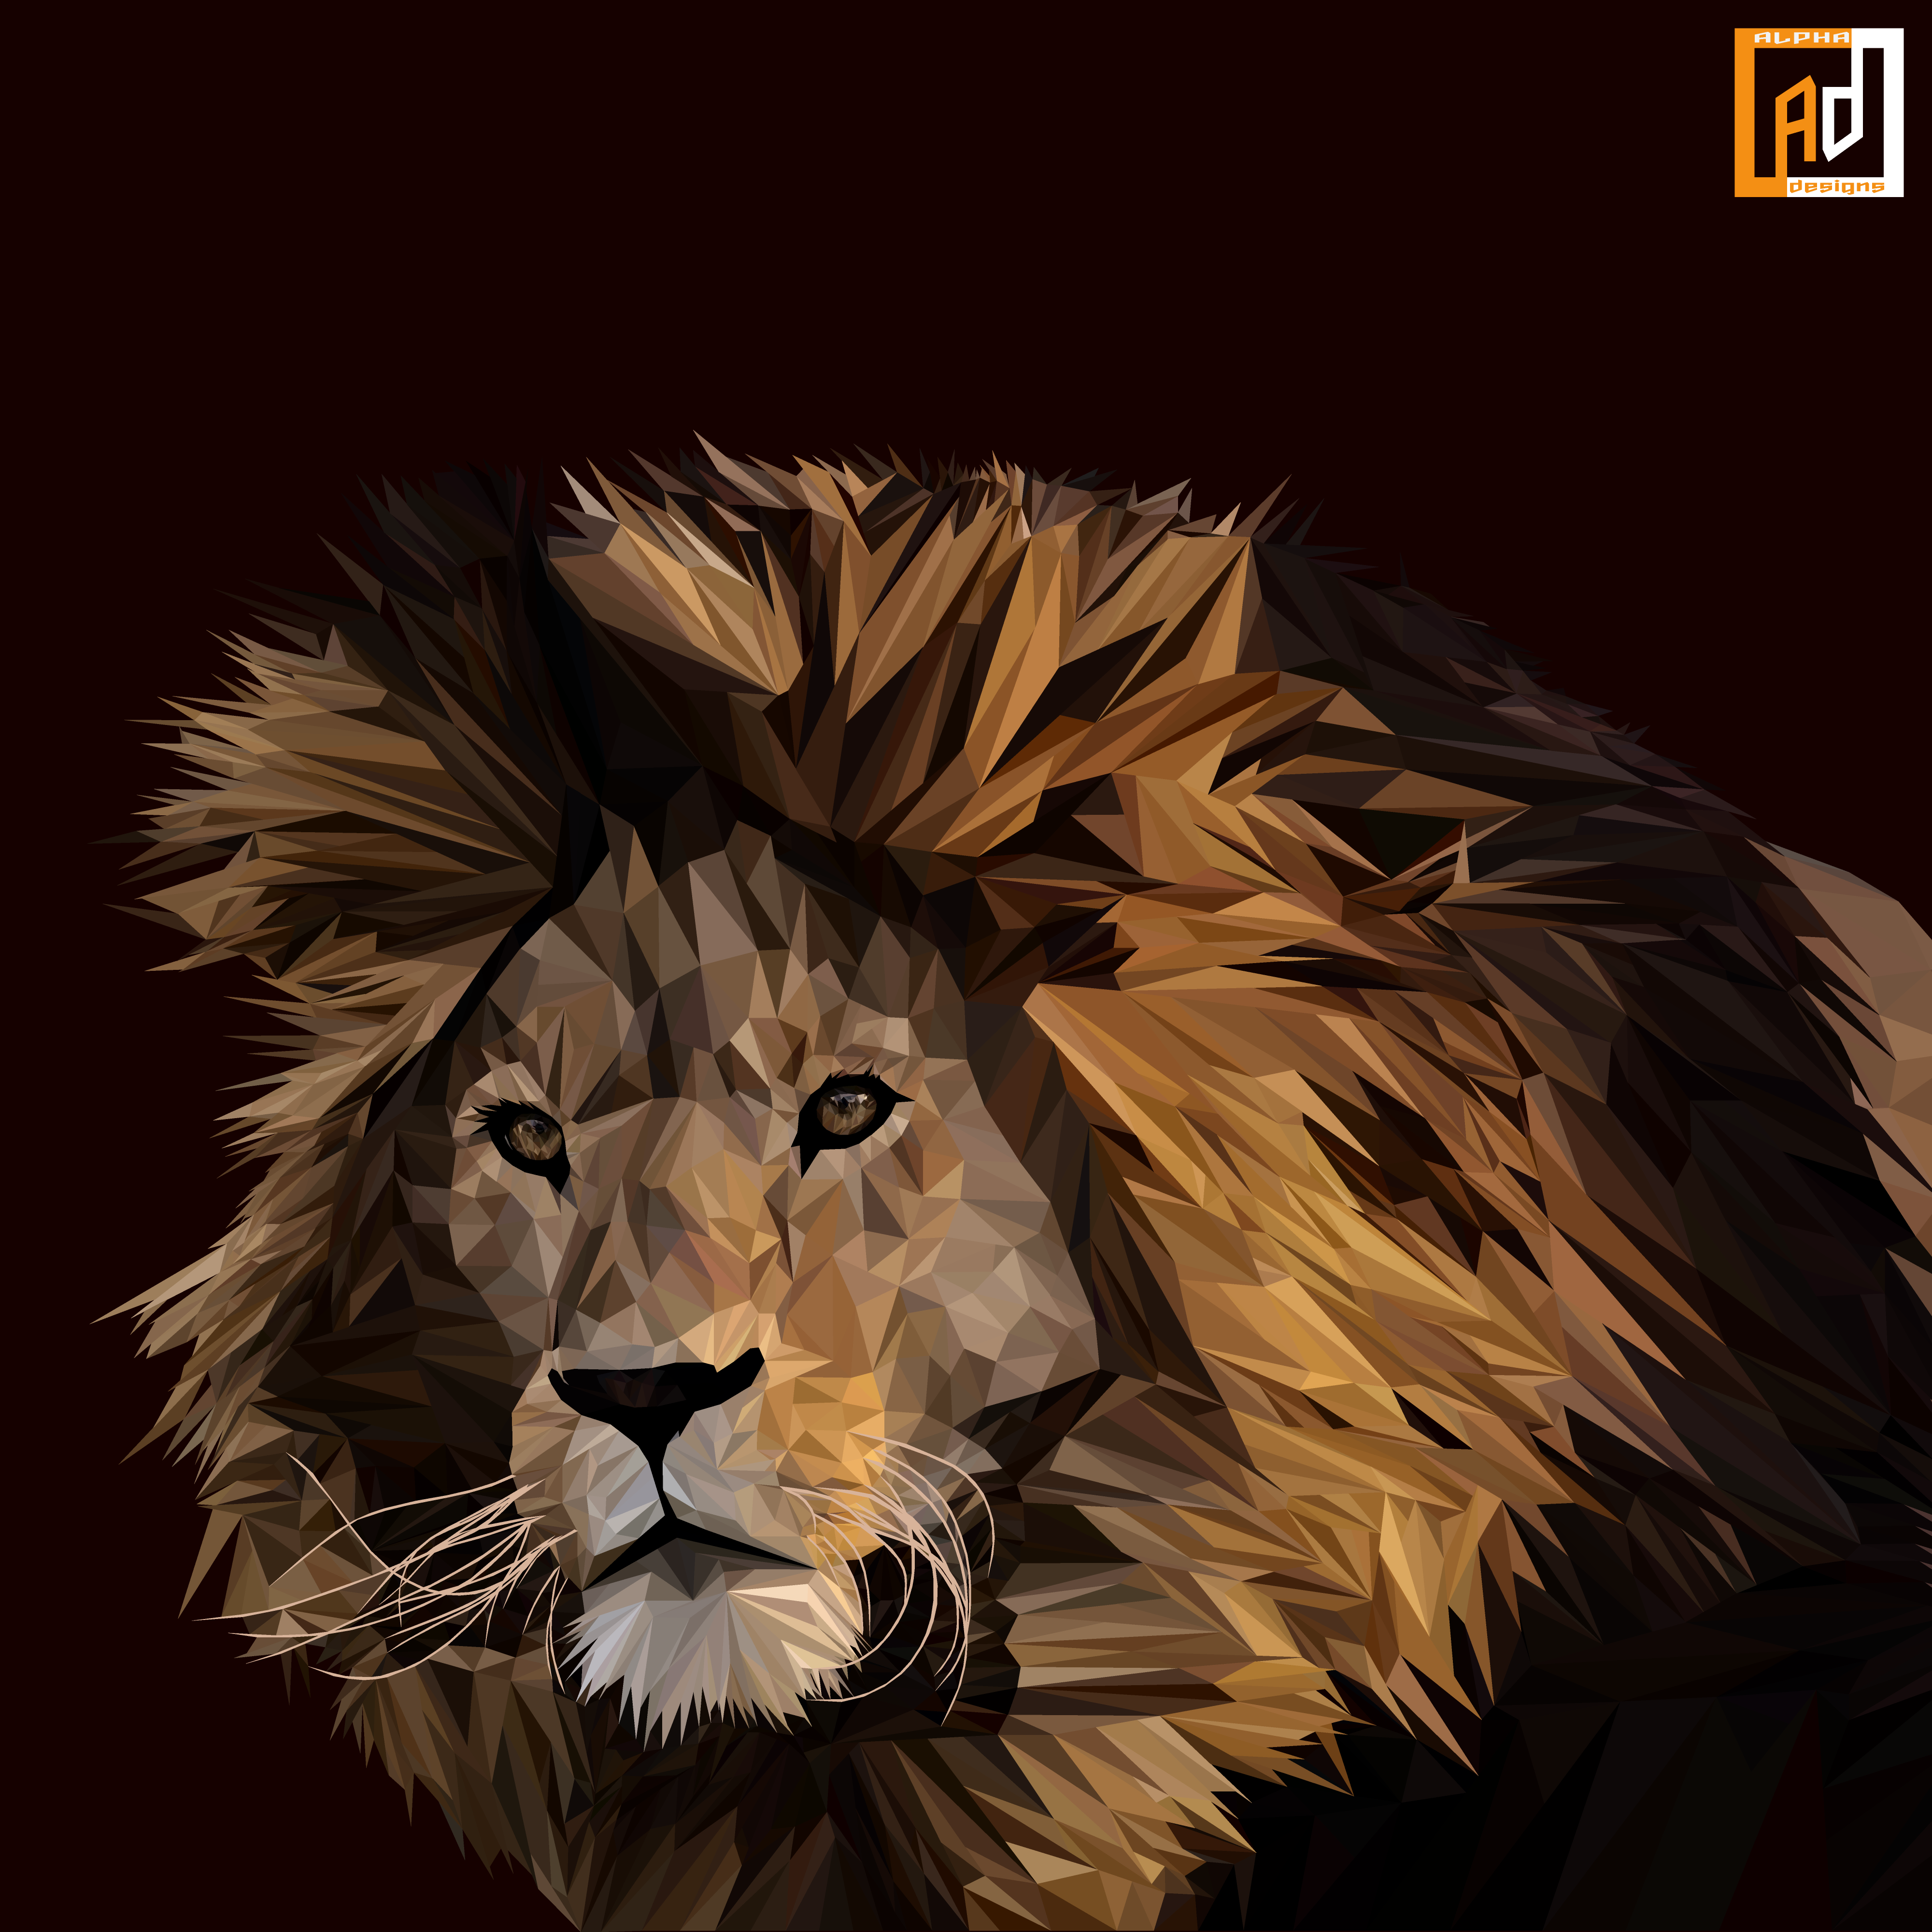 Lion Lowpoly Illustration by mglking